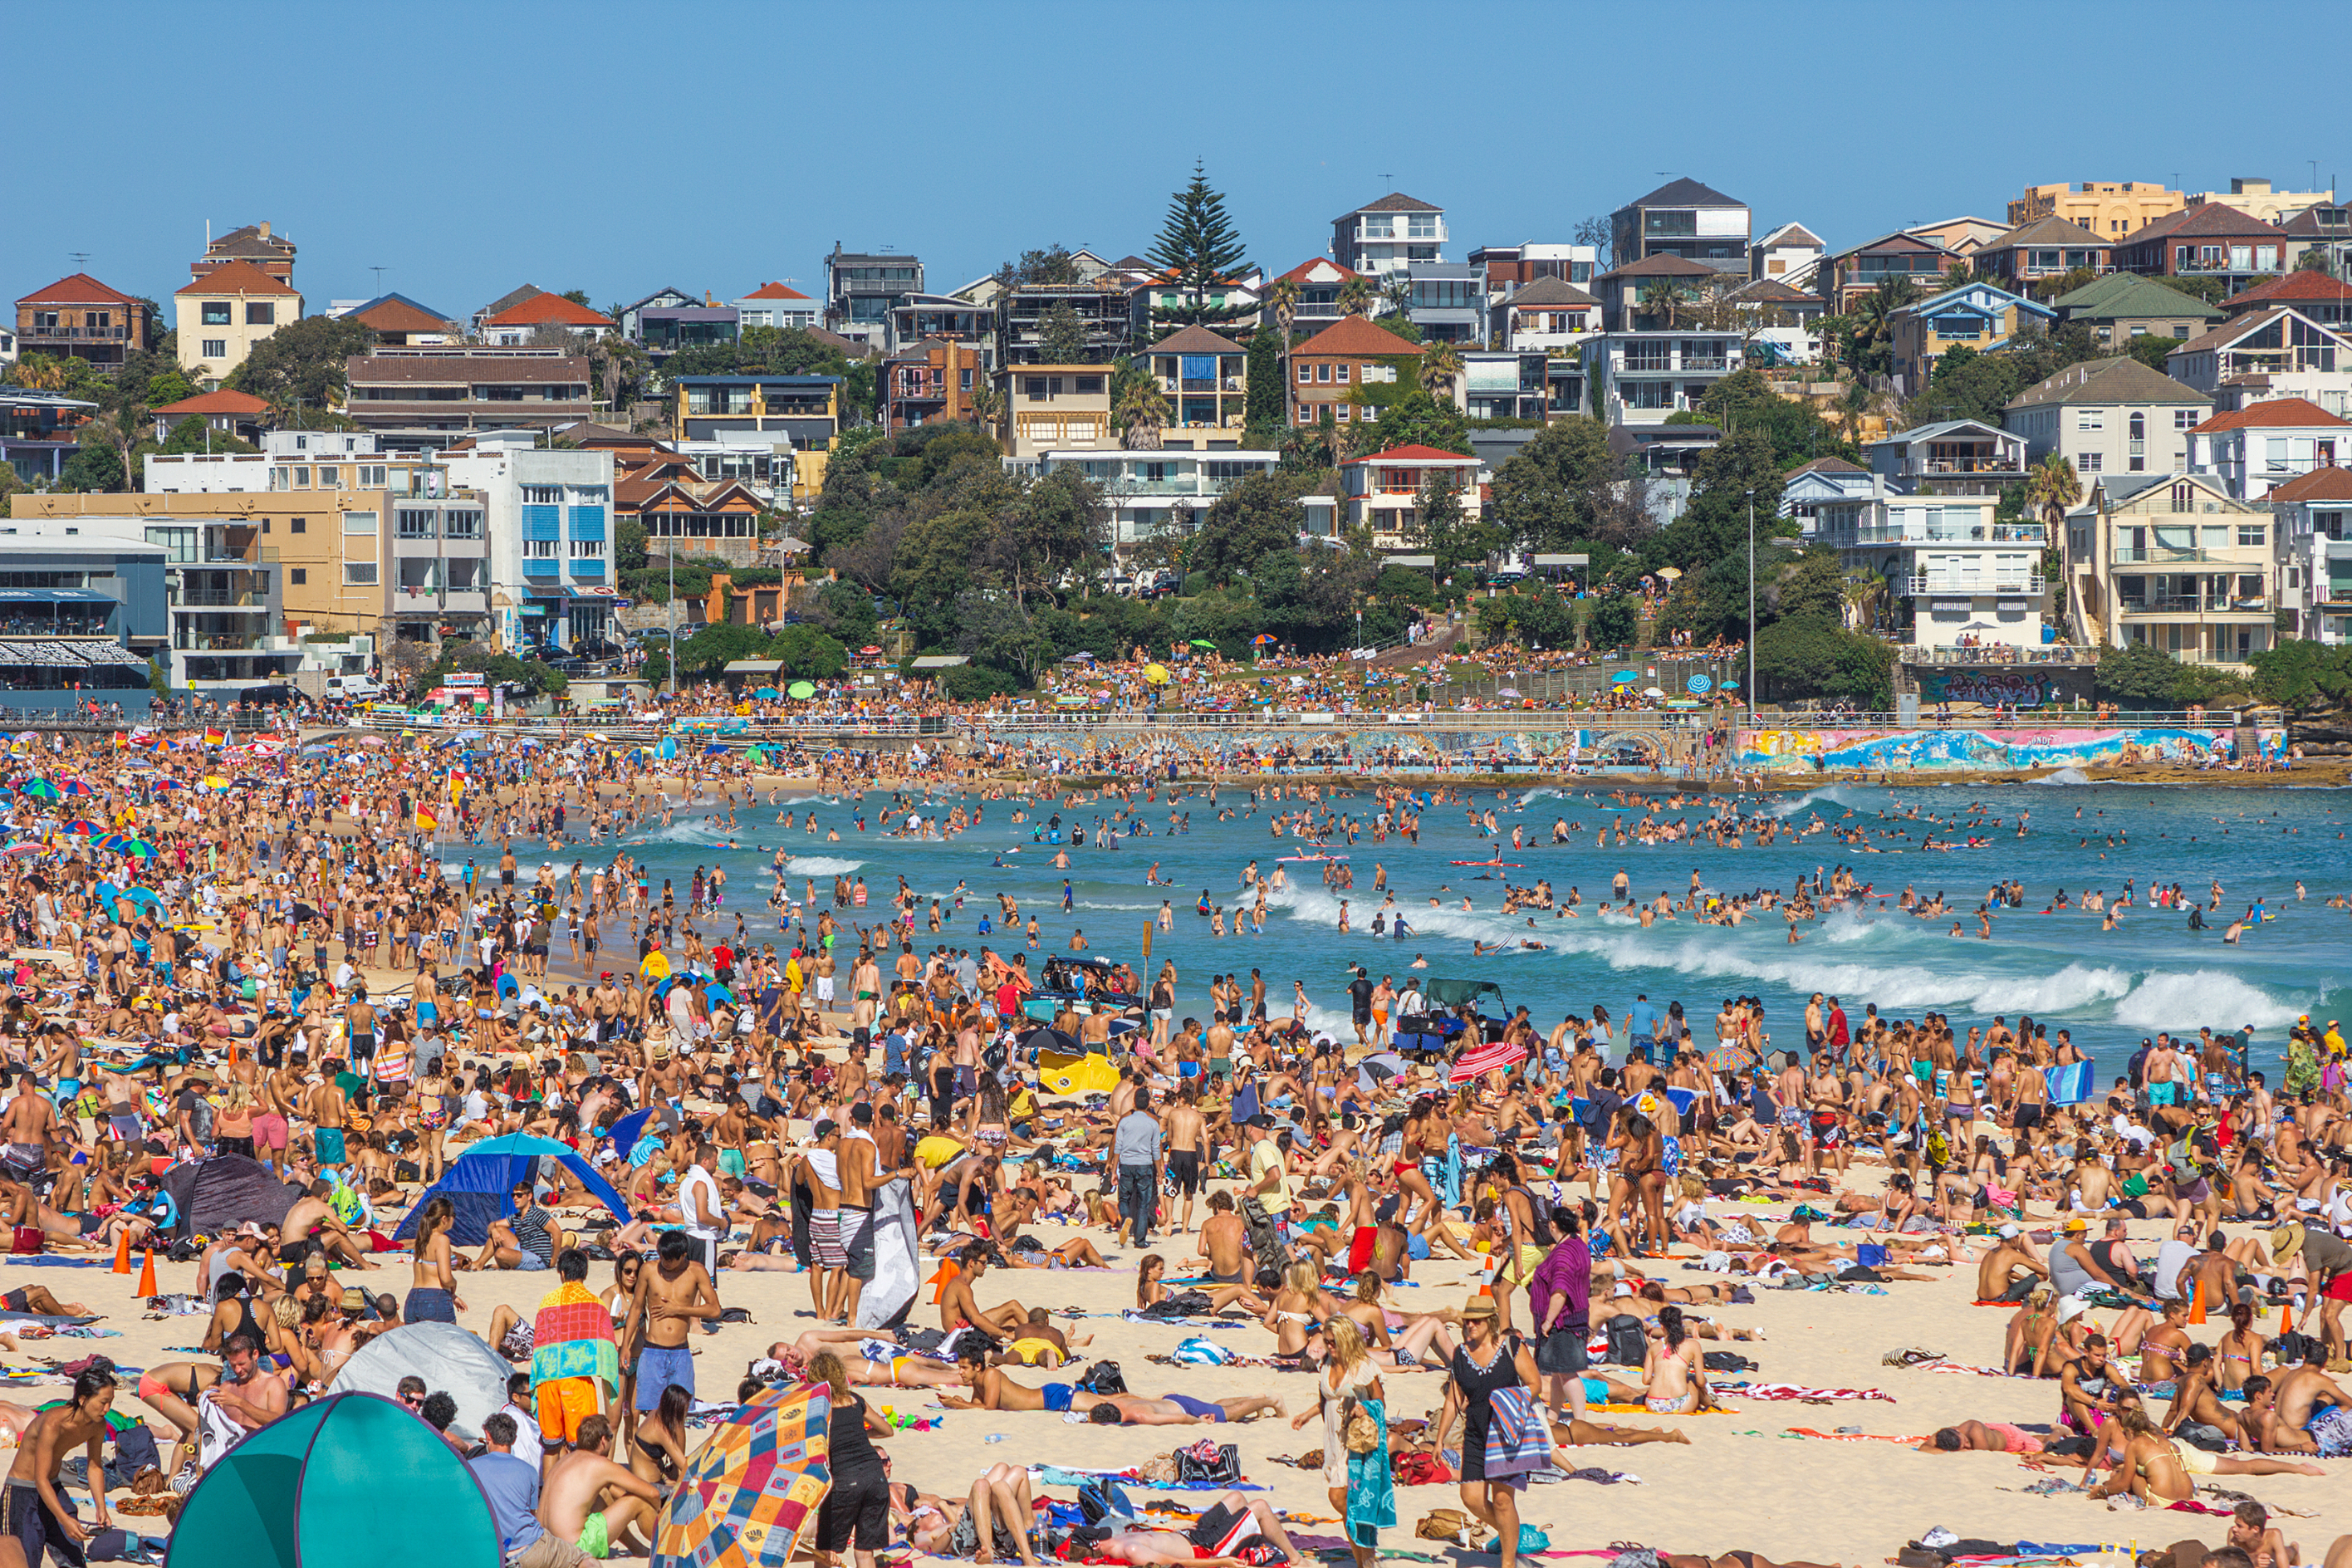 Crowded beach with people sunbathing and swimming, cityscape in the background